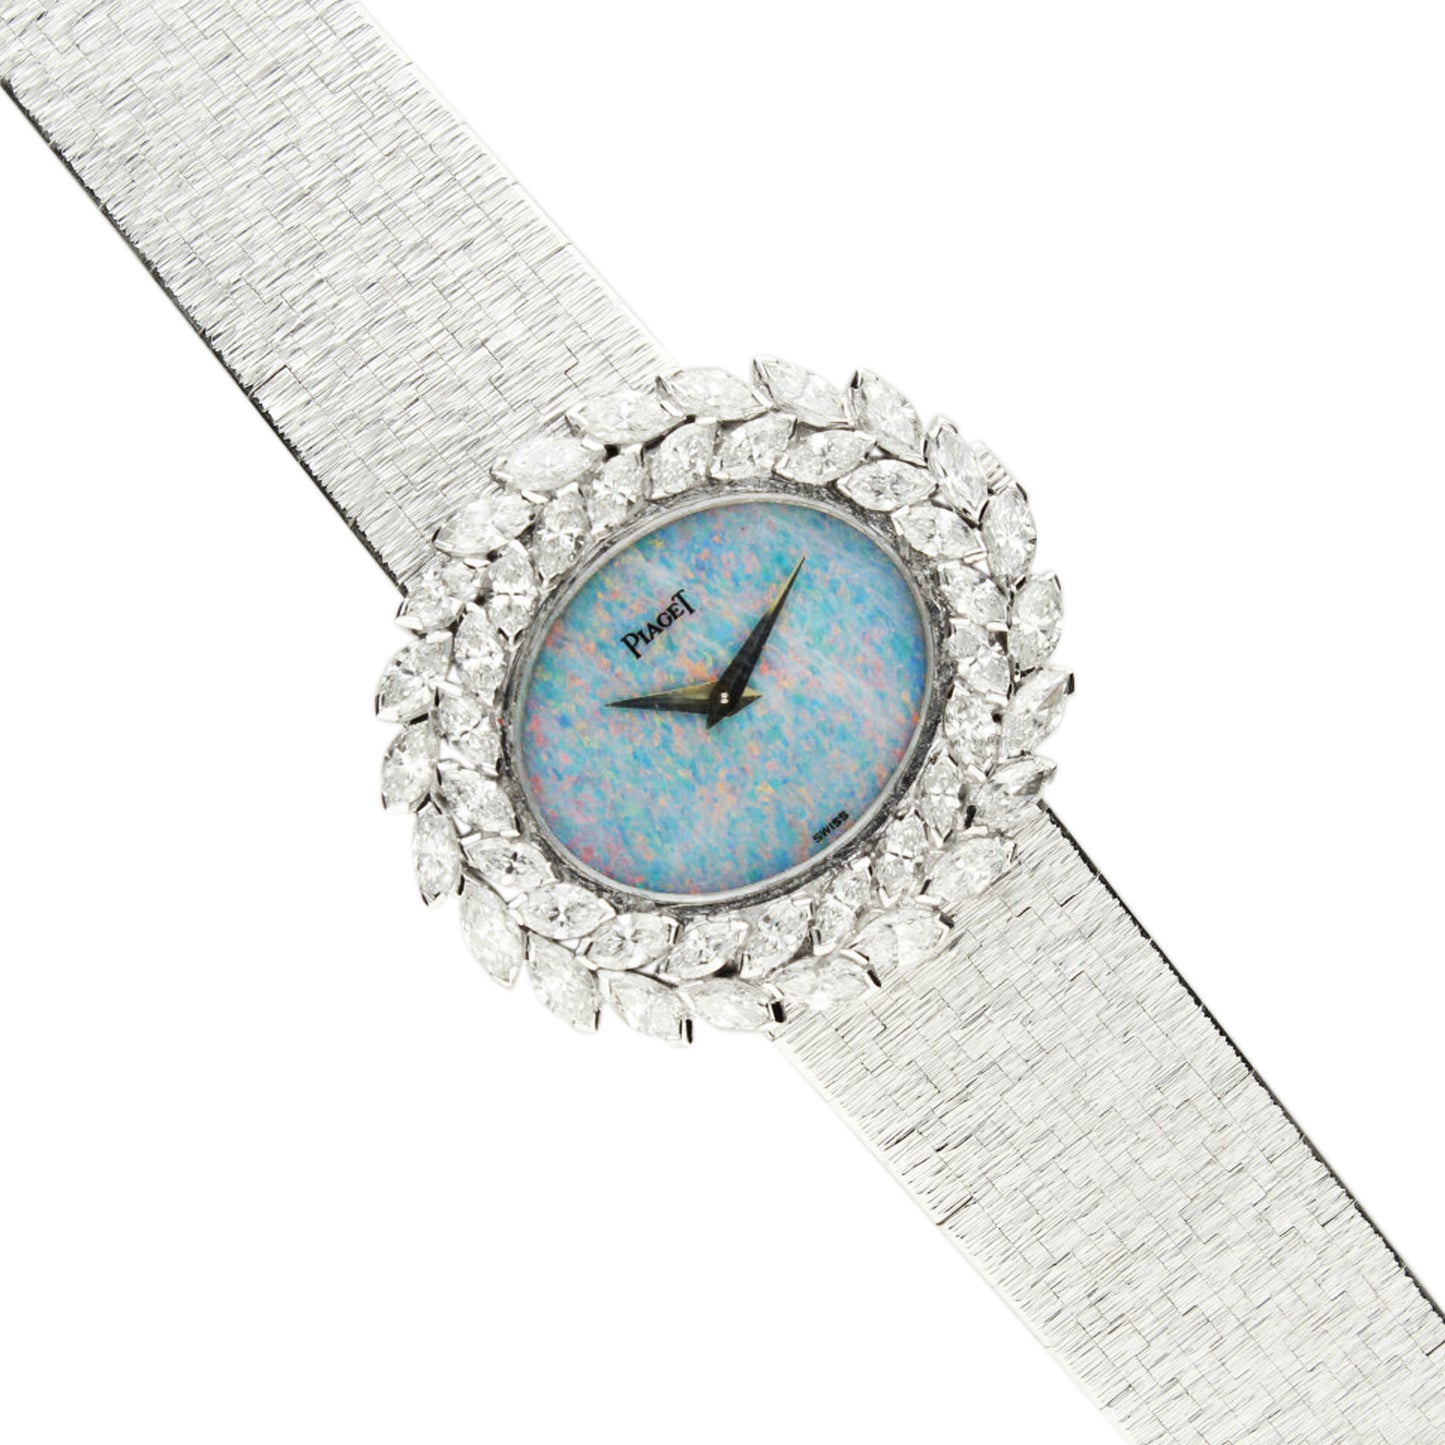 18ct white gold and diamond set, reference 9385 bracelet watch with opal dial. Made 1970's